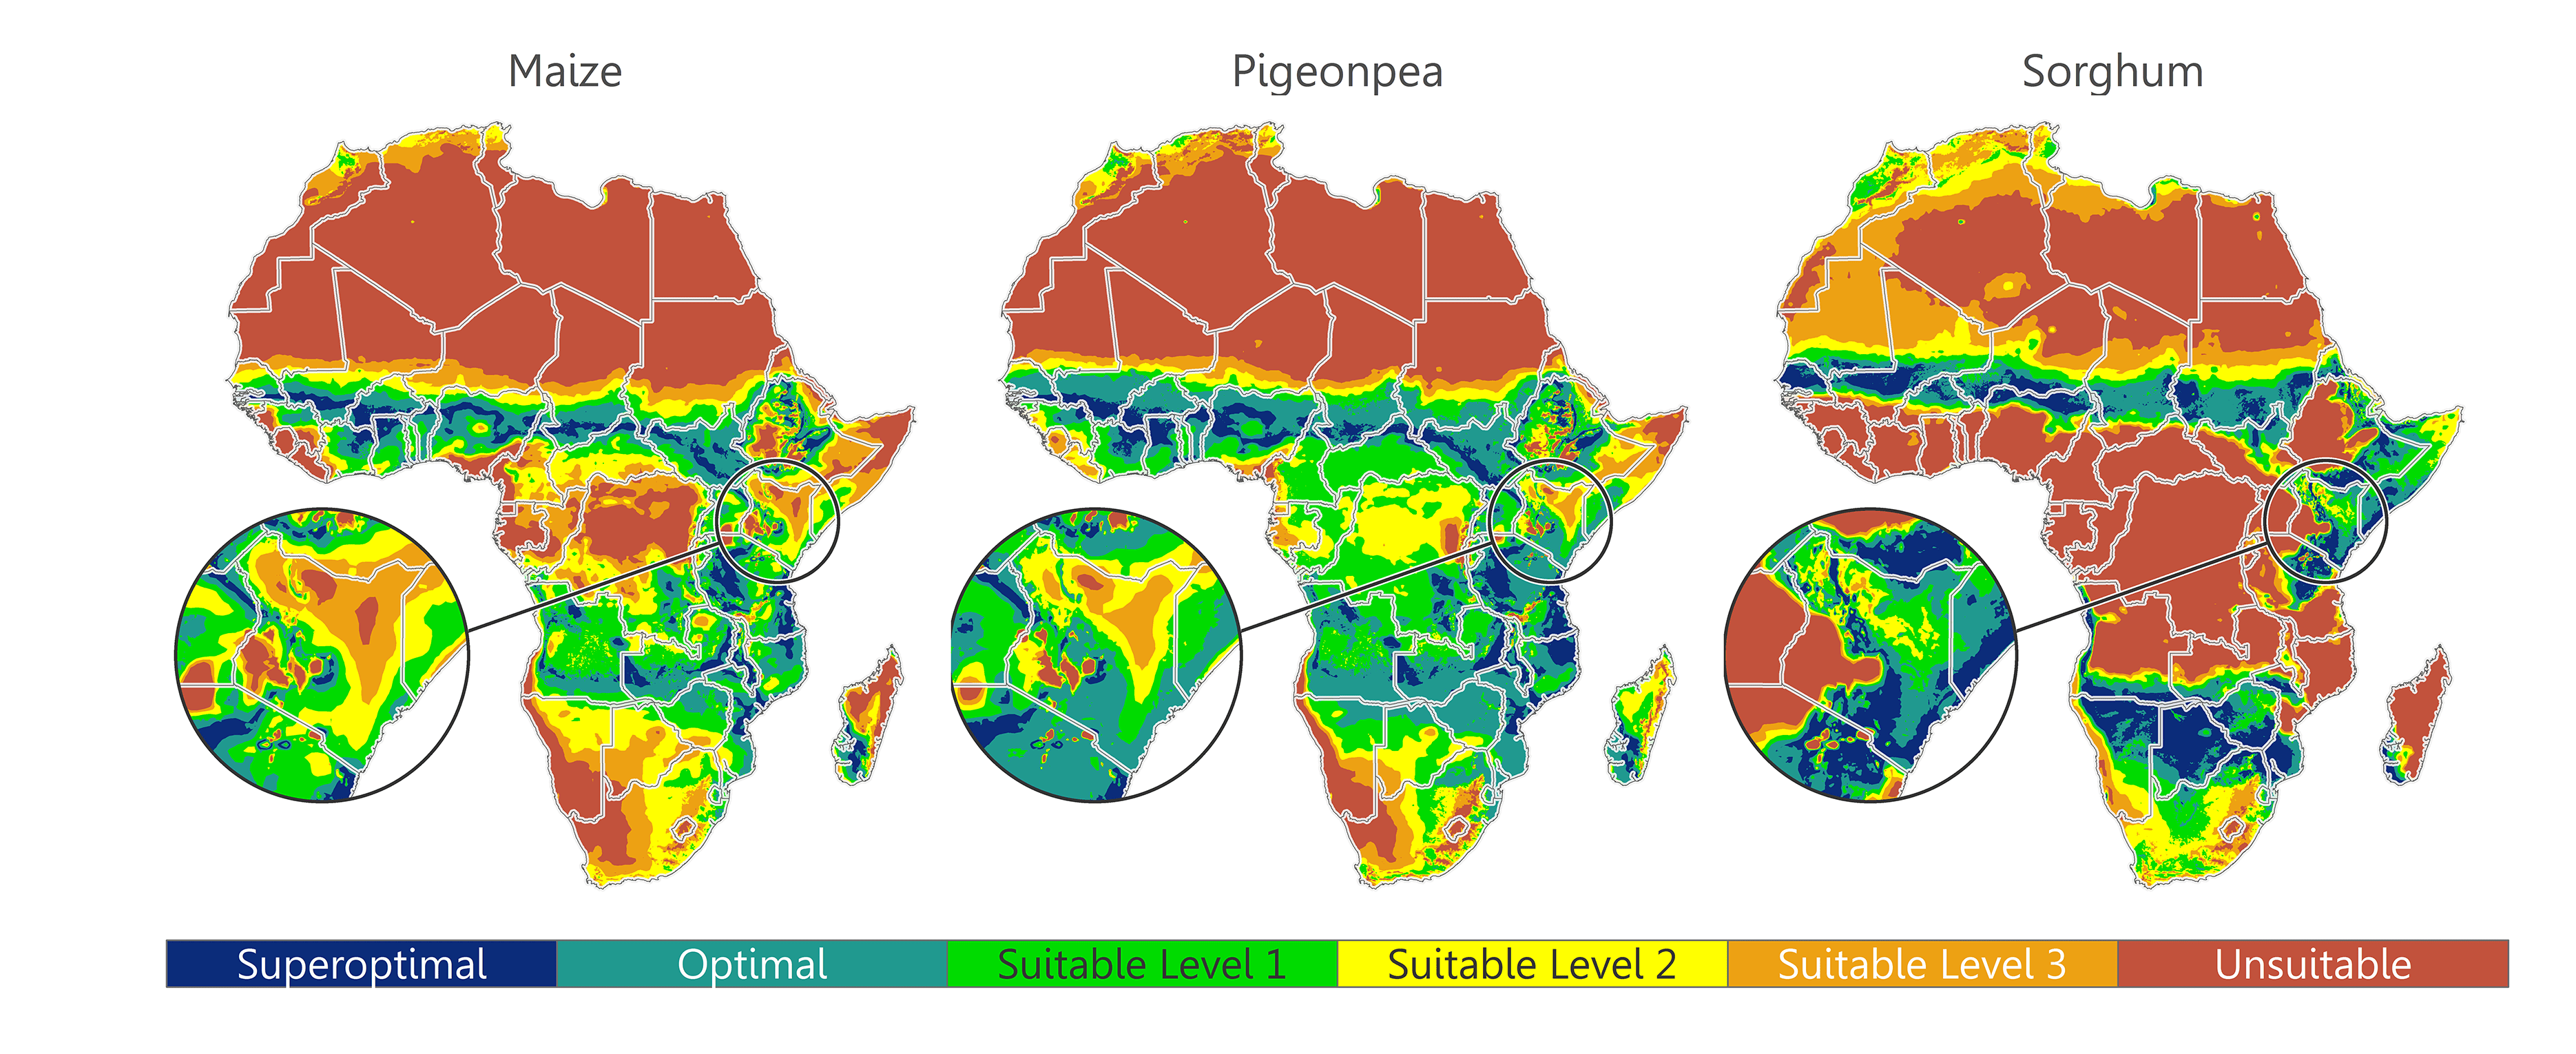 Image of maize, pigeonpea, and sorghum suitability across Africa.